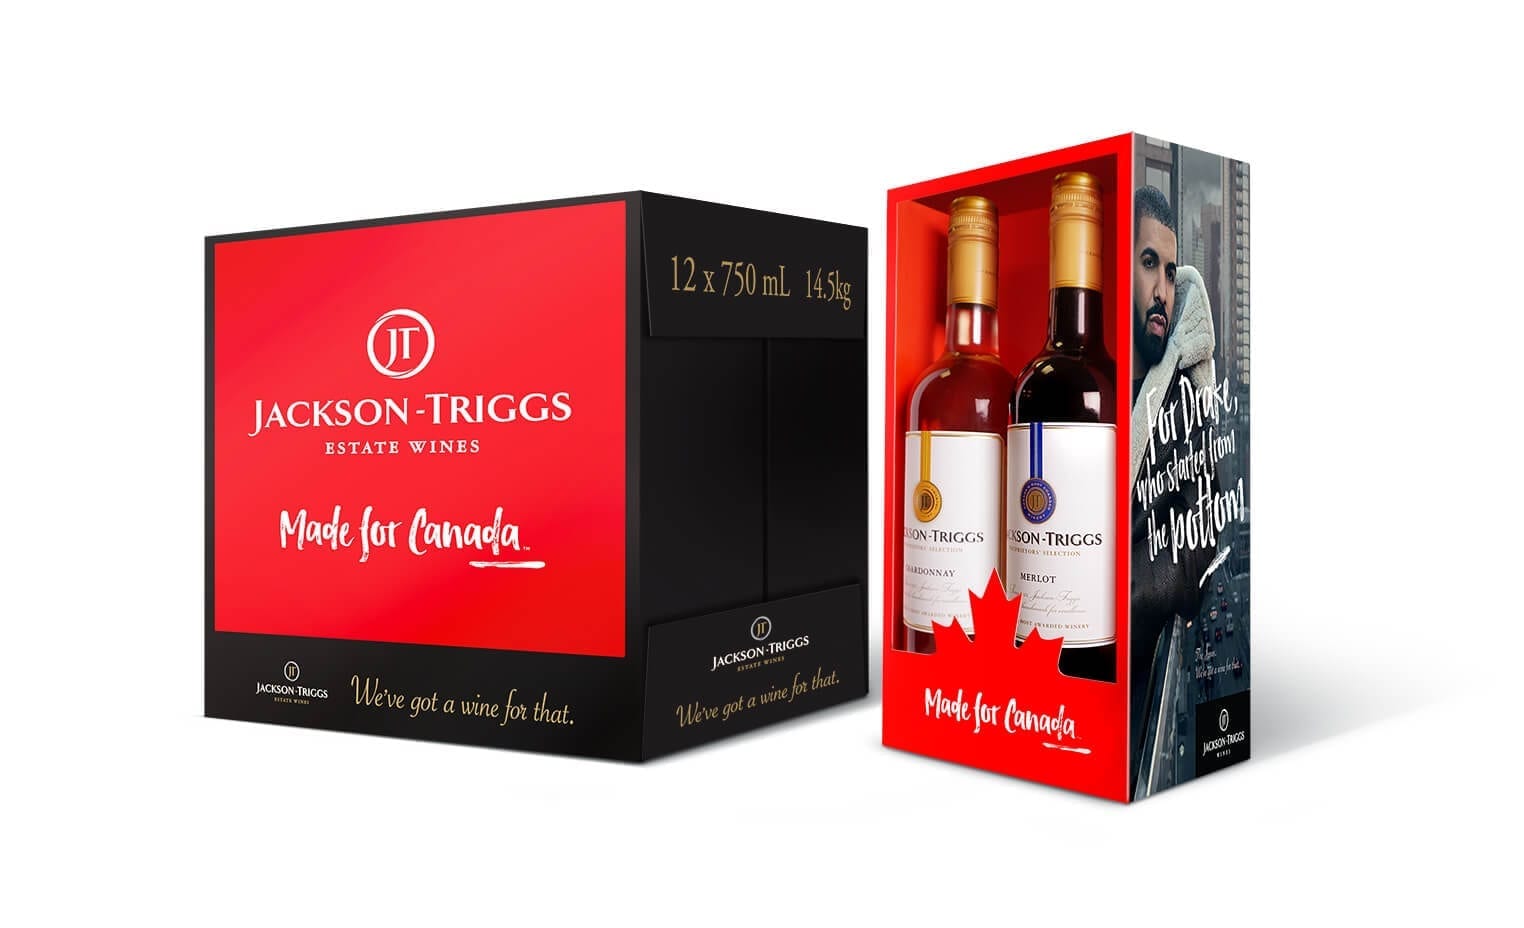 Jackson-Triggs Made For Canada product packaging